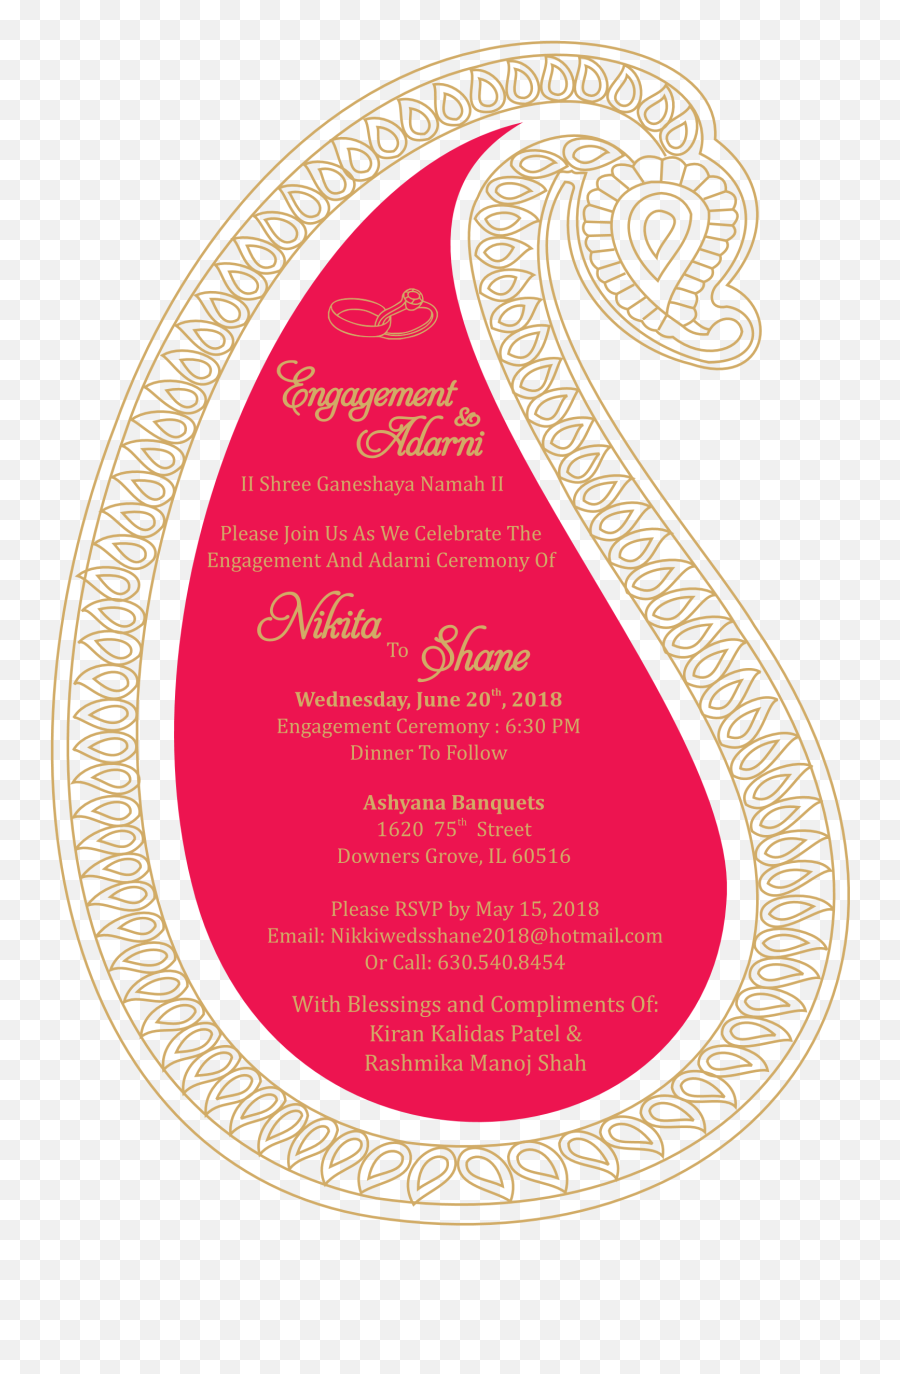 Wedding Invitation Png Image With No - Dot Emoji,Please Join Us Clipart